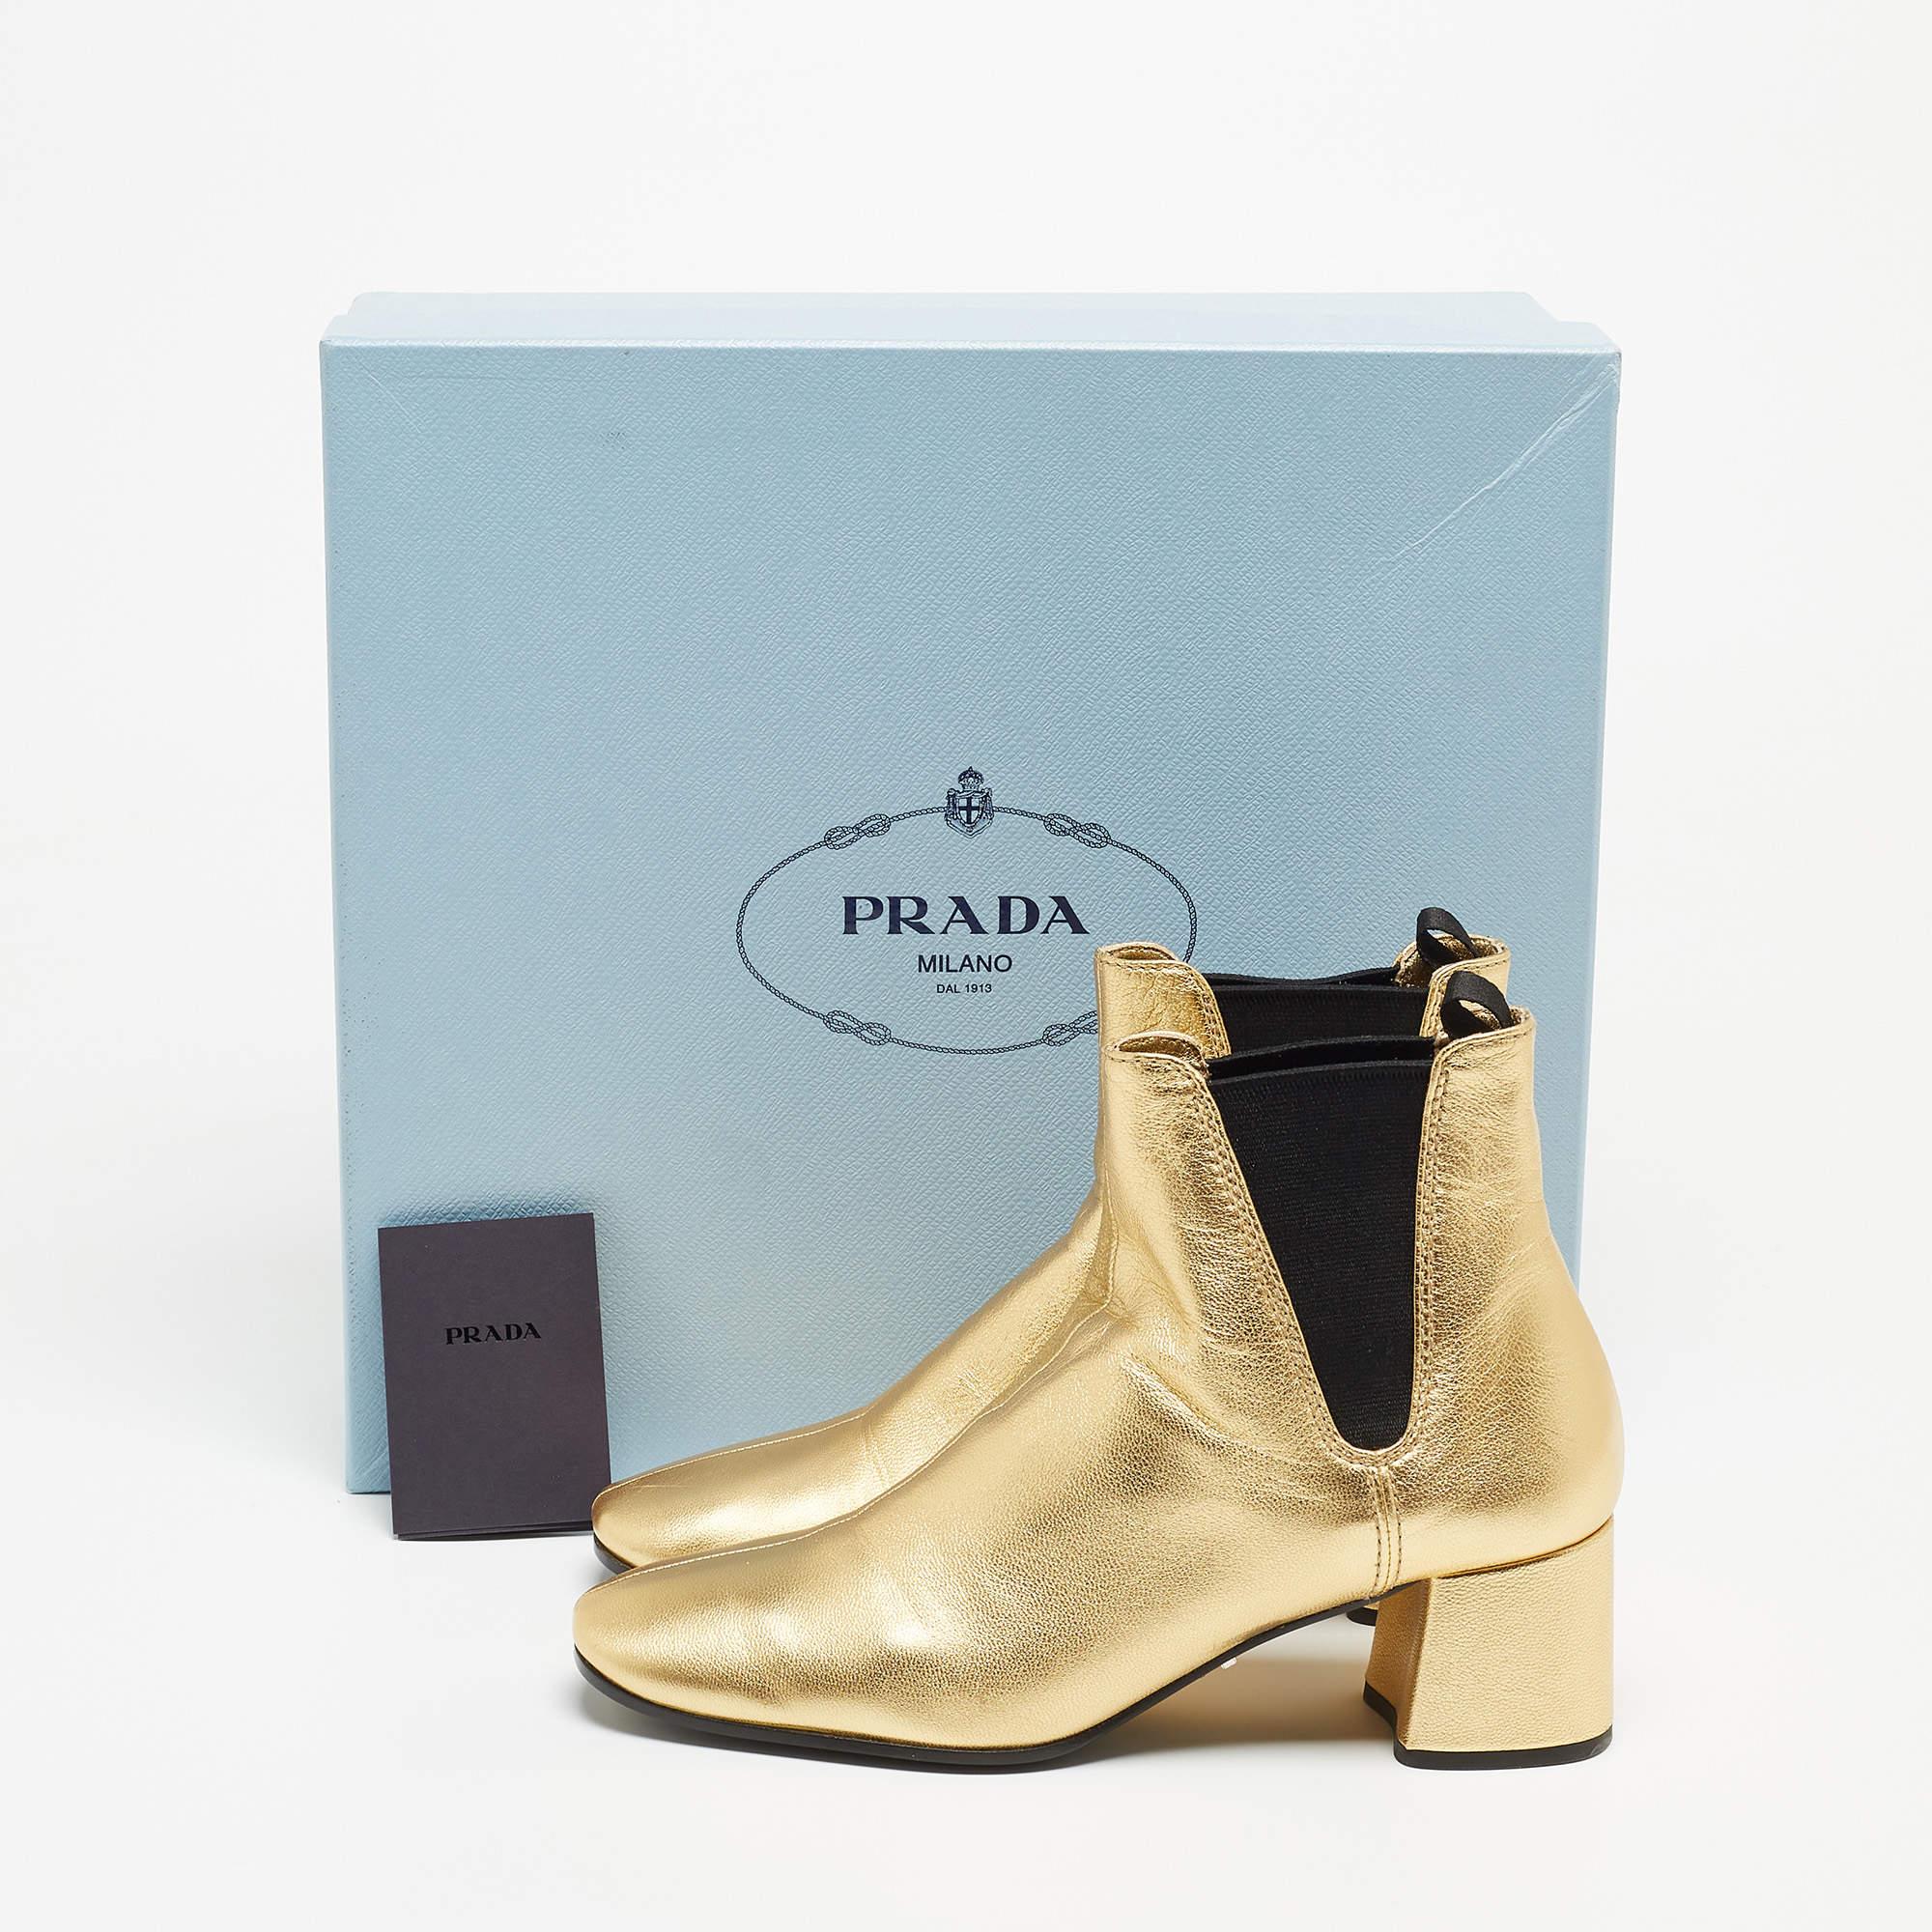 Prada Metallic Gold Leather Ankle Boots Size 37 9